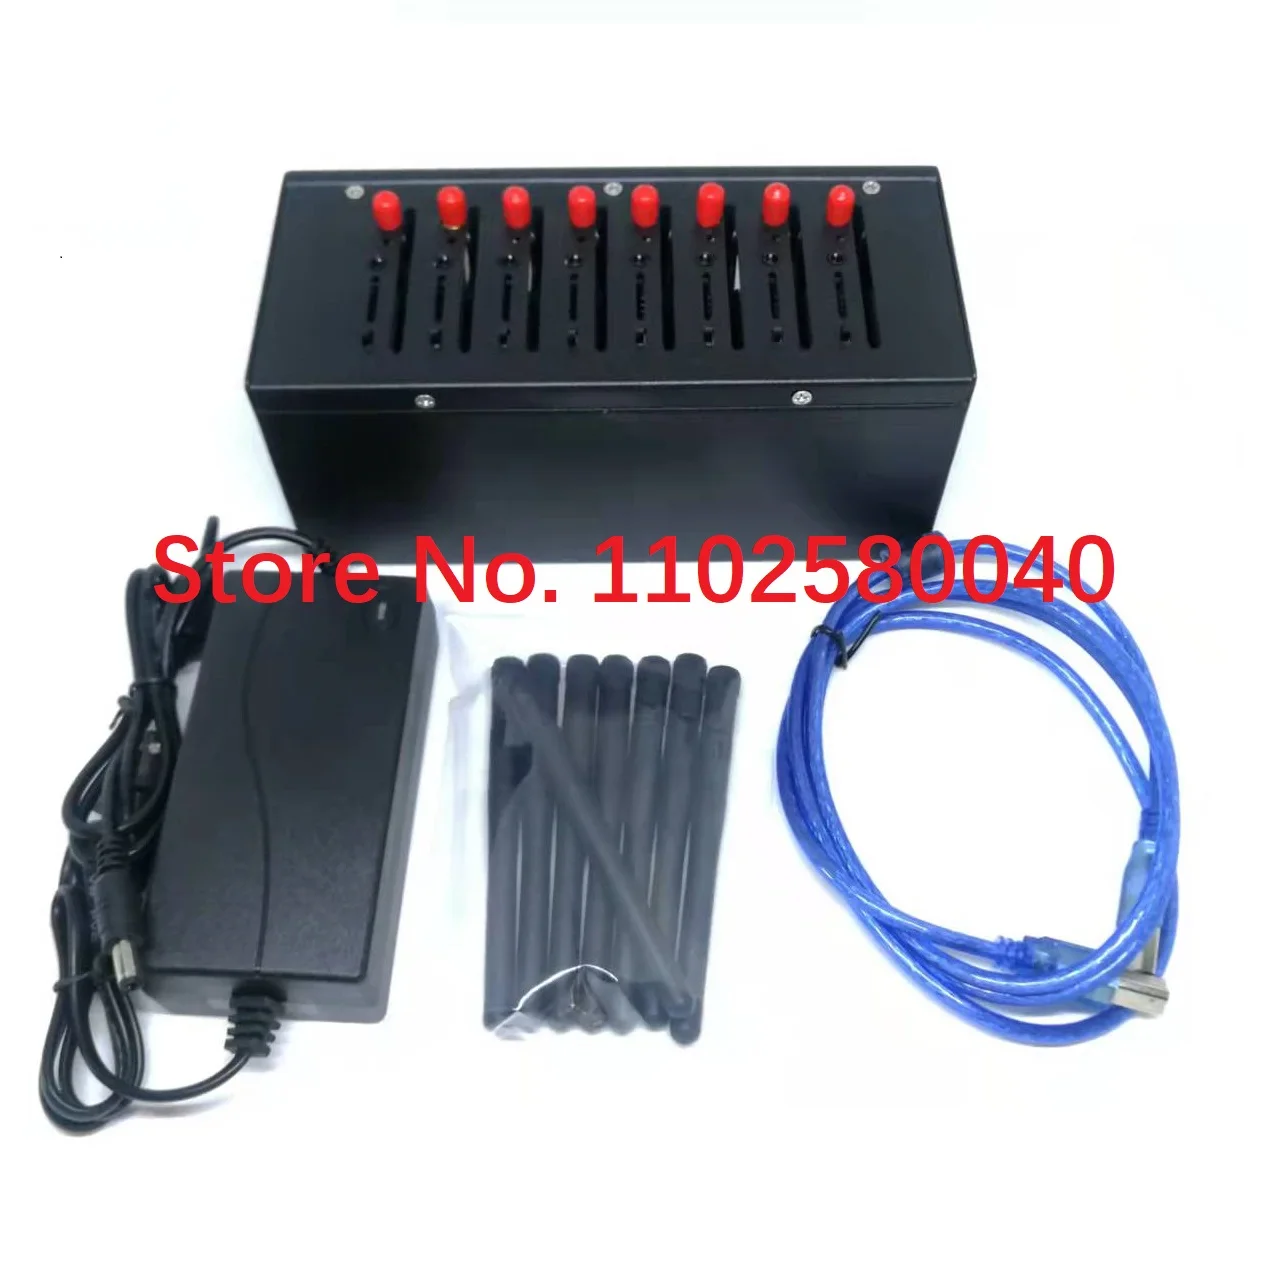 

Low cost 2G/3G/4G module 8 ports sms modem gsm gateway broadcast machine sim box for bulk sms marketing with AT Command